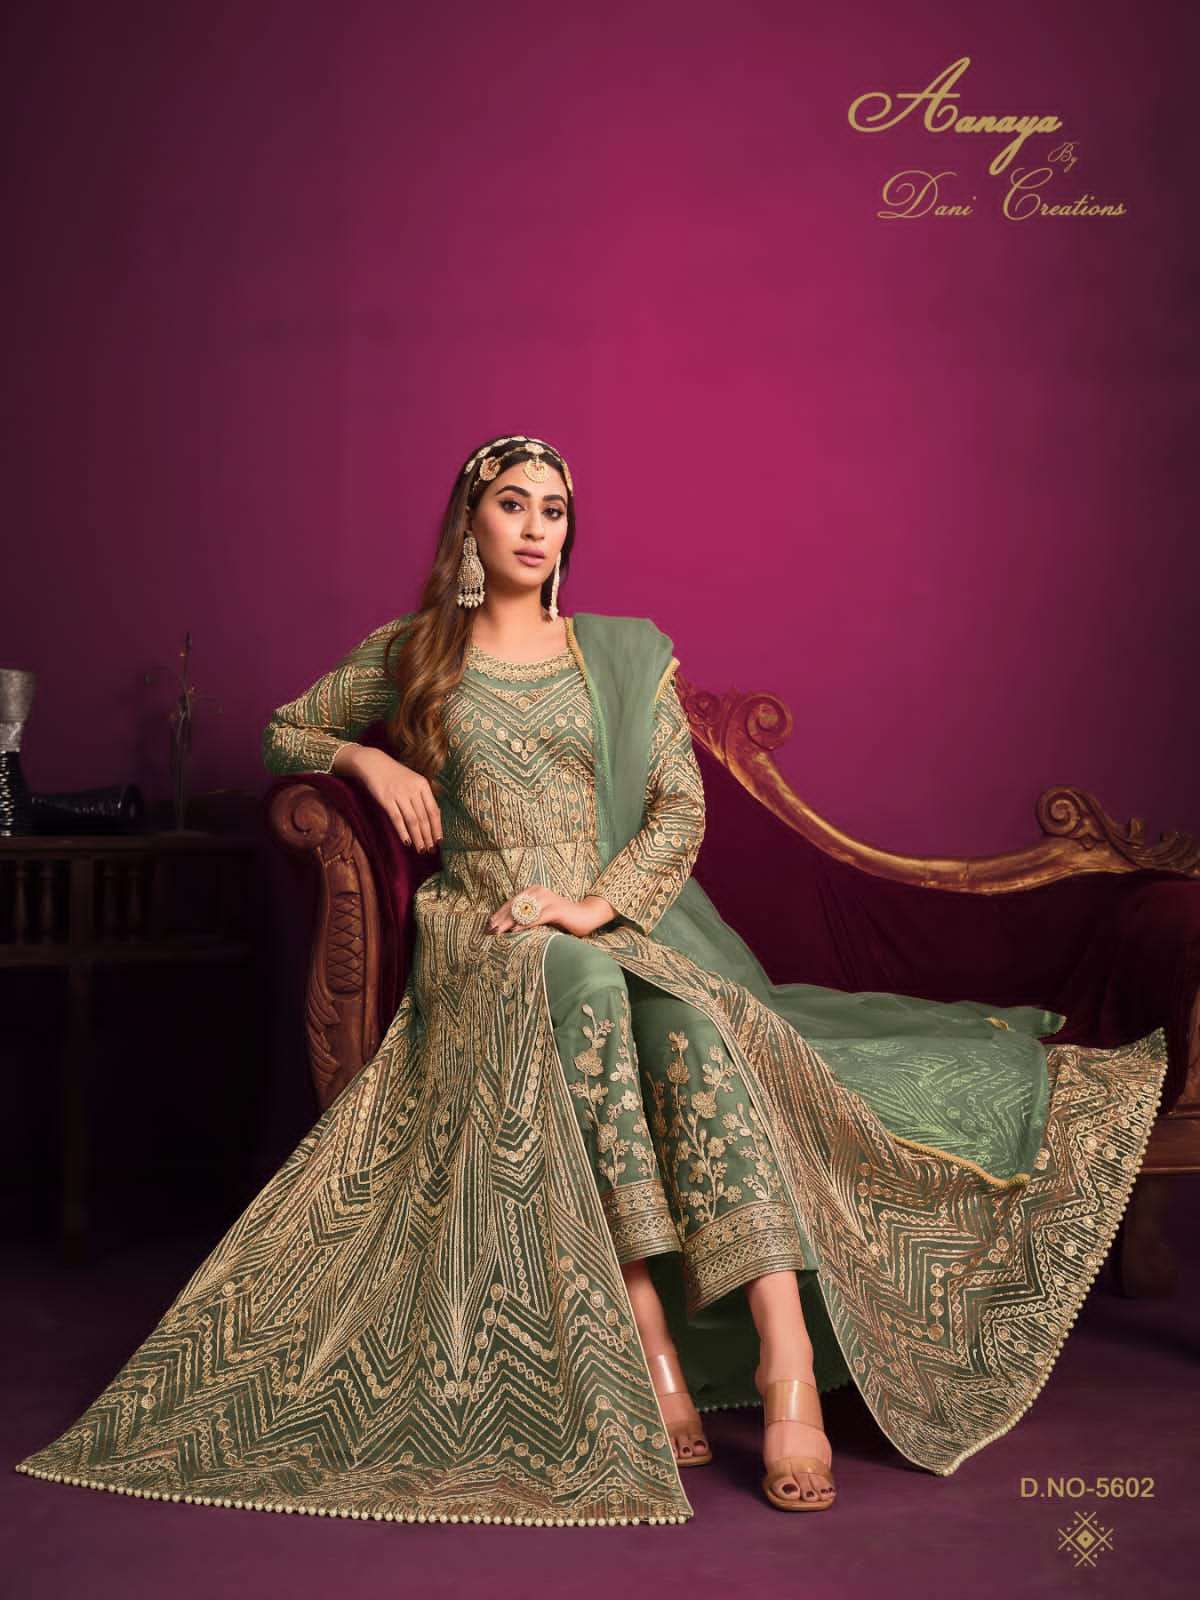 aanaya by dani creation catalogue 5600 series vol 156 series 5601 to 5604 designer full heavy embroidery partywear designer anarkali dress with pant embroidery indian attire designer suit 